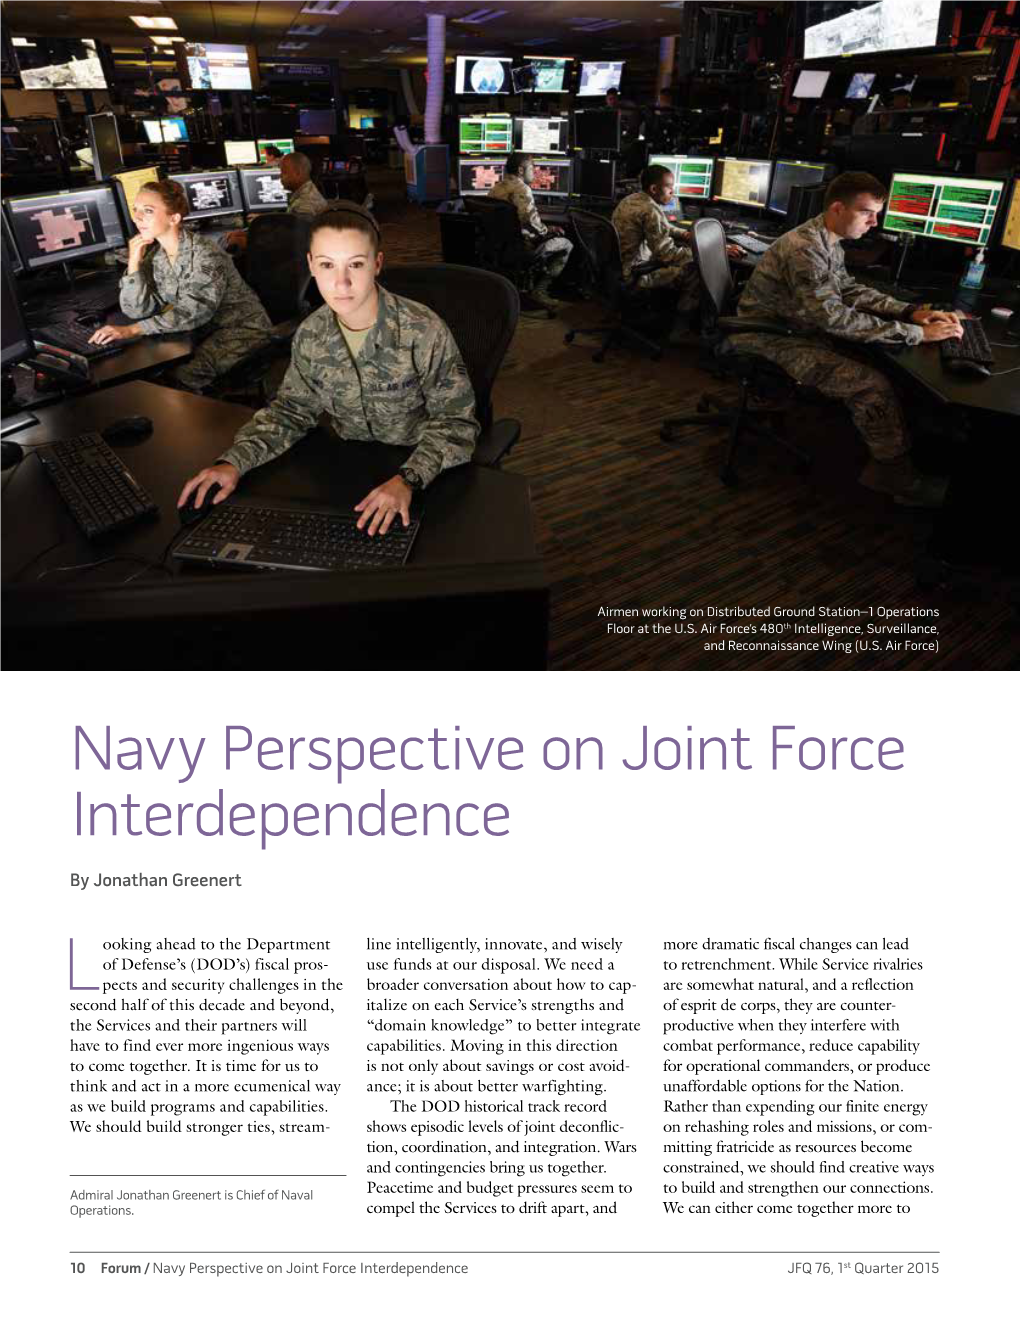 Navy Perspective on Joint Force Interdependence